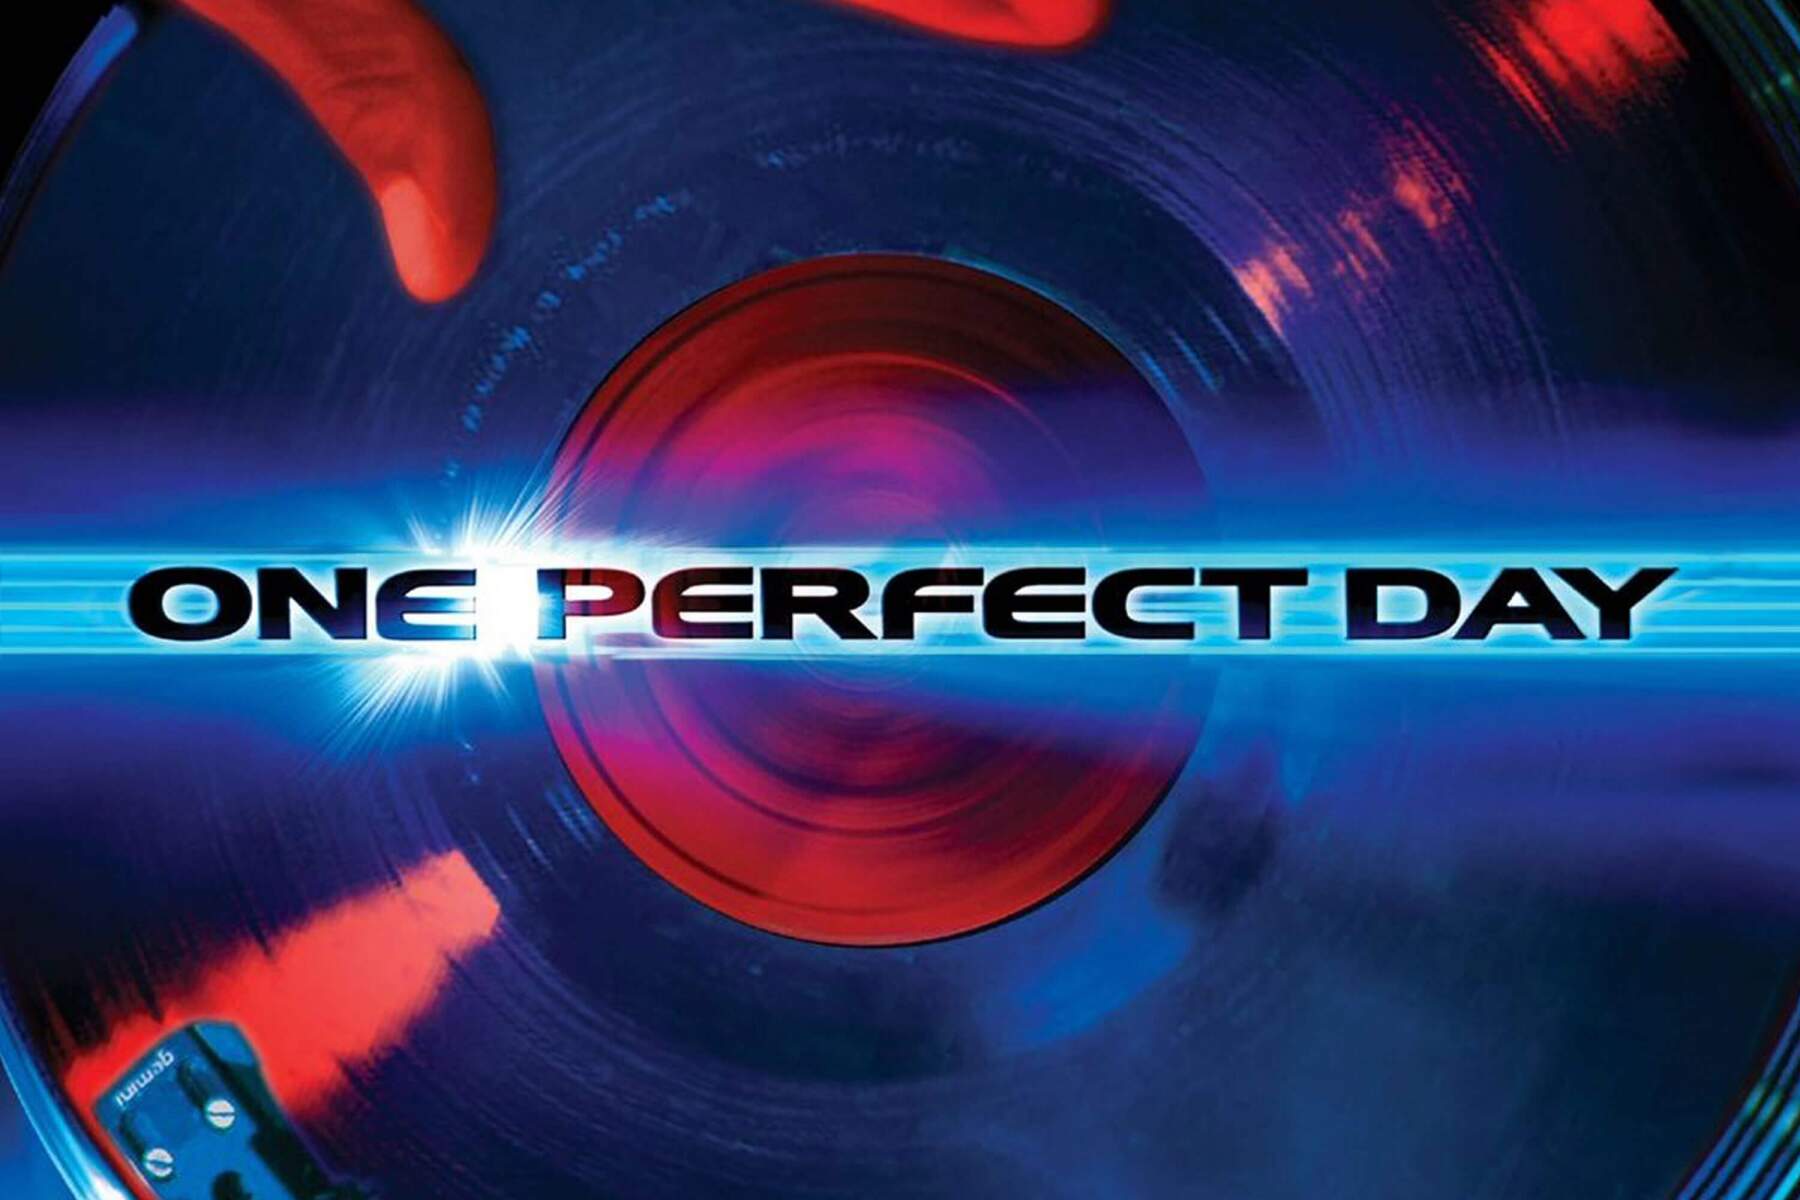 One Perfect Day: Interview with Executive Producer Phil Gregory and Sound Designer Paul Pirola